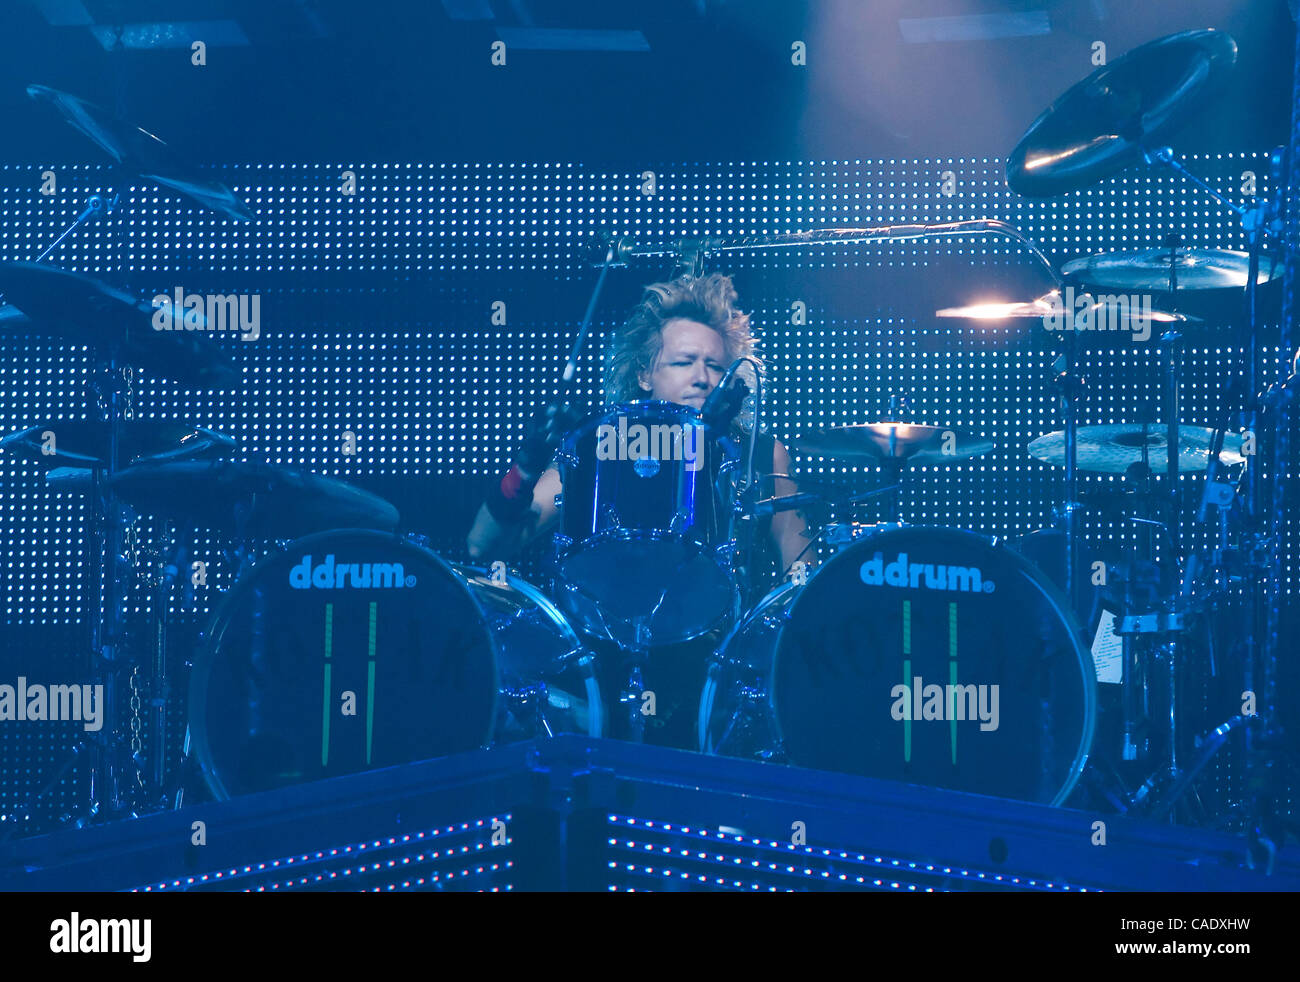 Aug 17, 2010 - Broomfield, Colorado, U.S. - Drummer JAMES KOTTAK of the Scorpions performs live at the 1st Bank Center in Broomfield, Colorado. (Credit Image: © Hector Acevedo/ZUMApress.com) Stock Photo